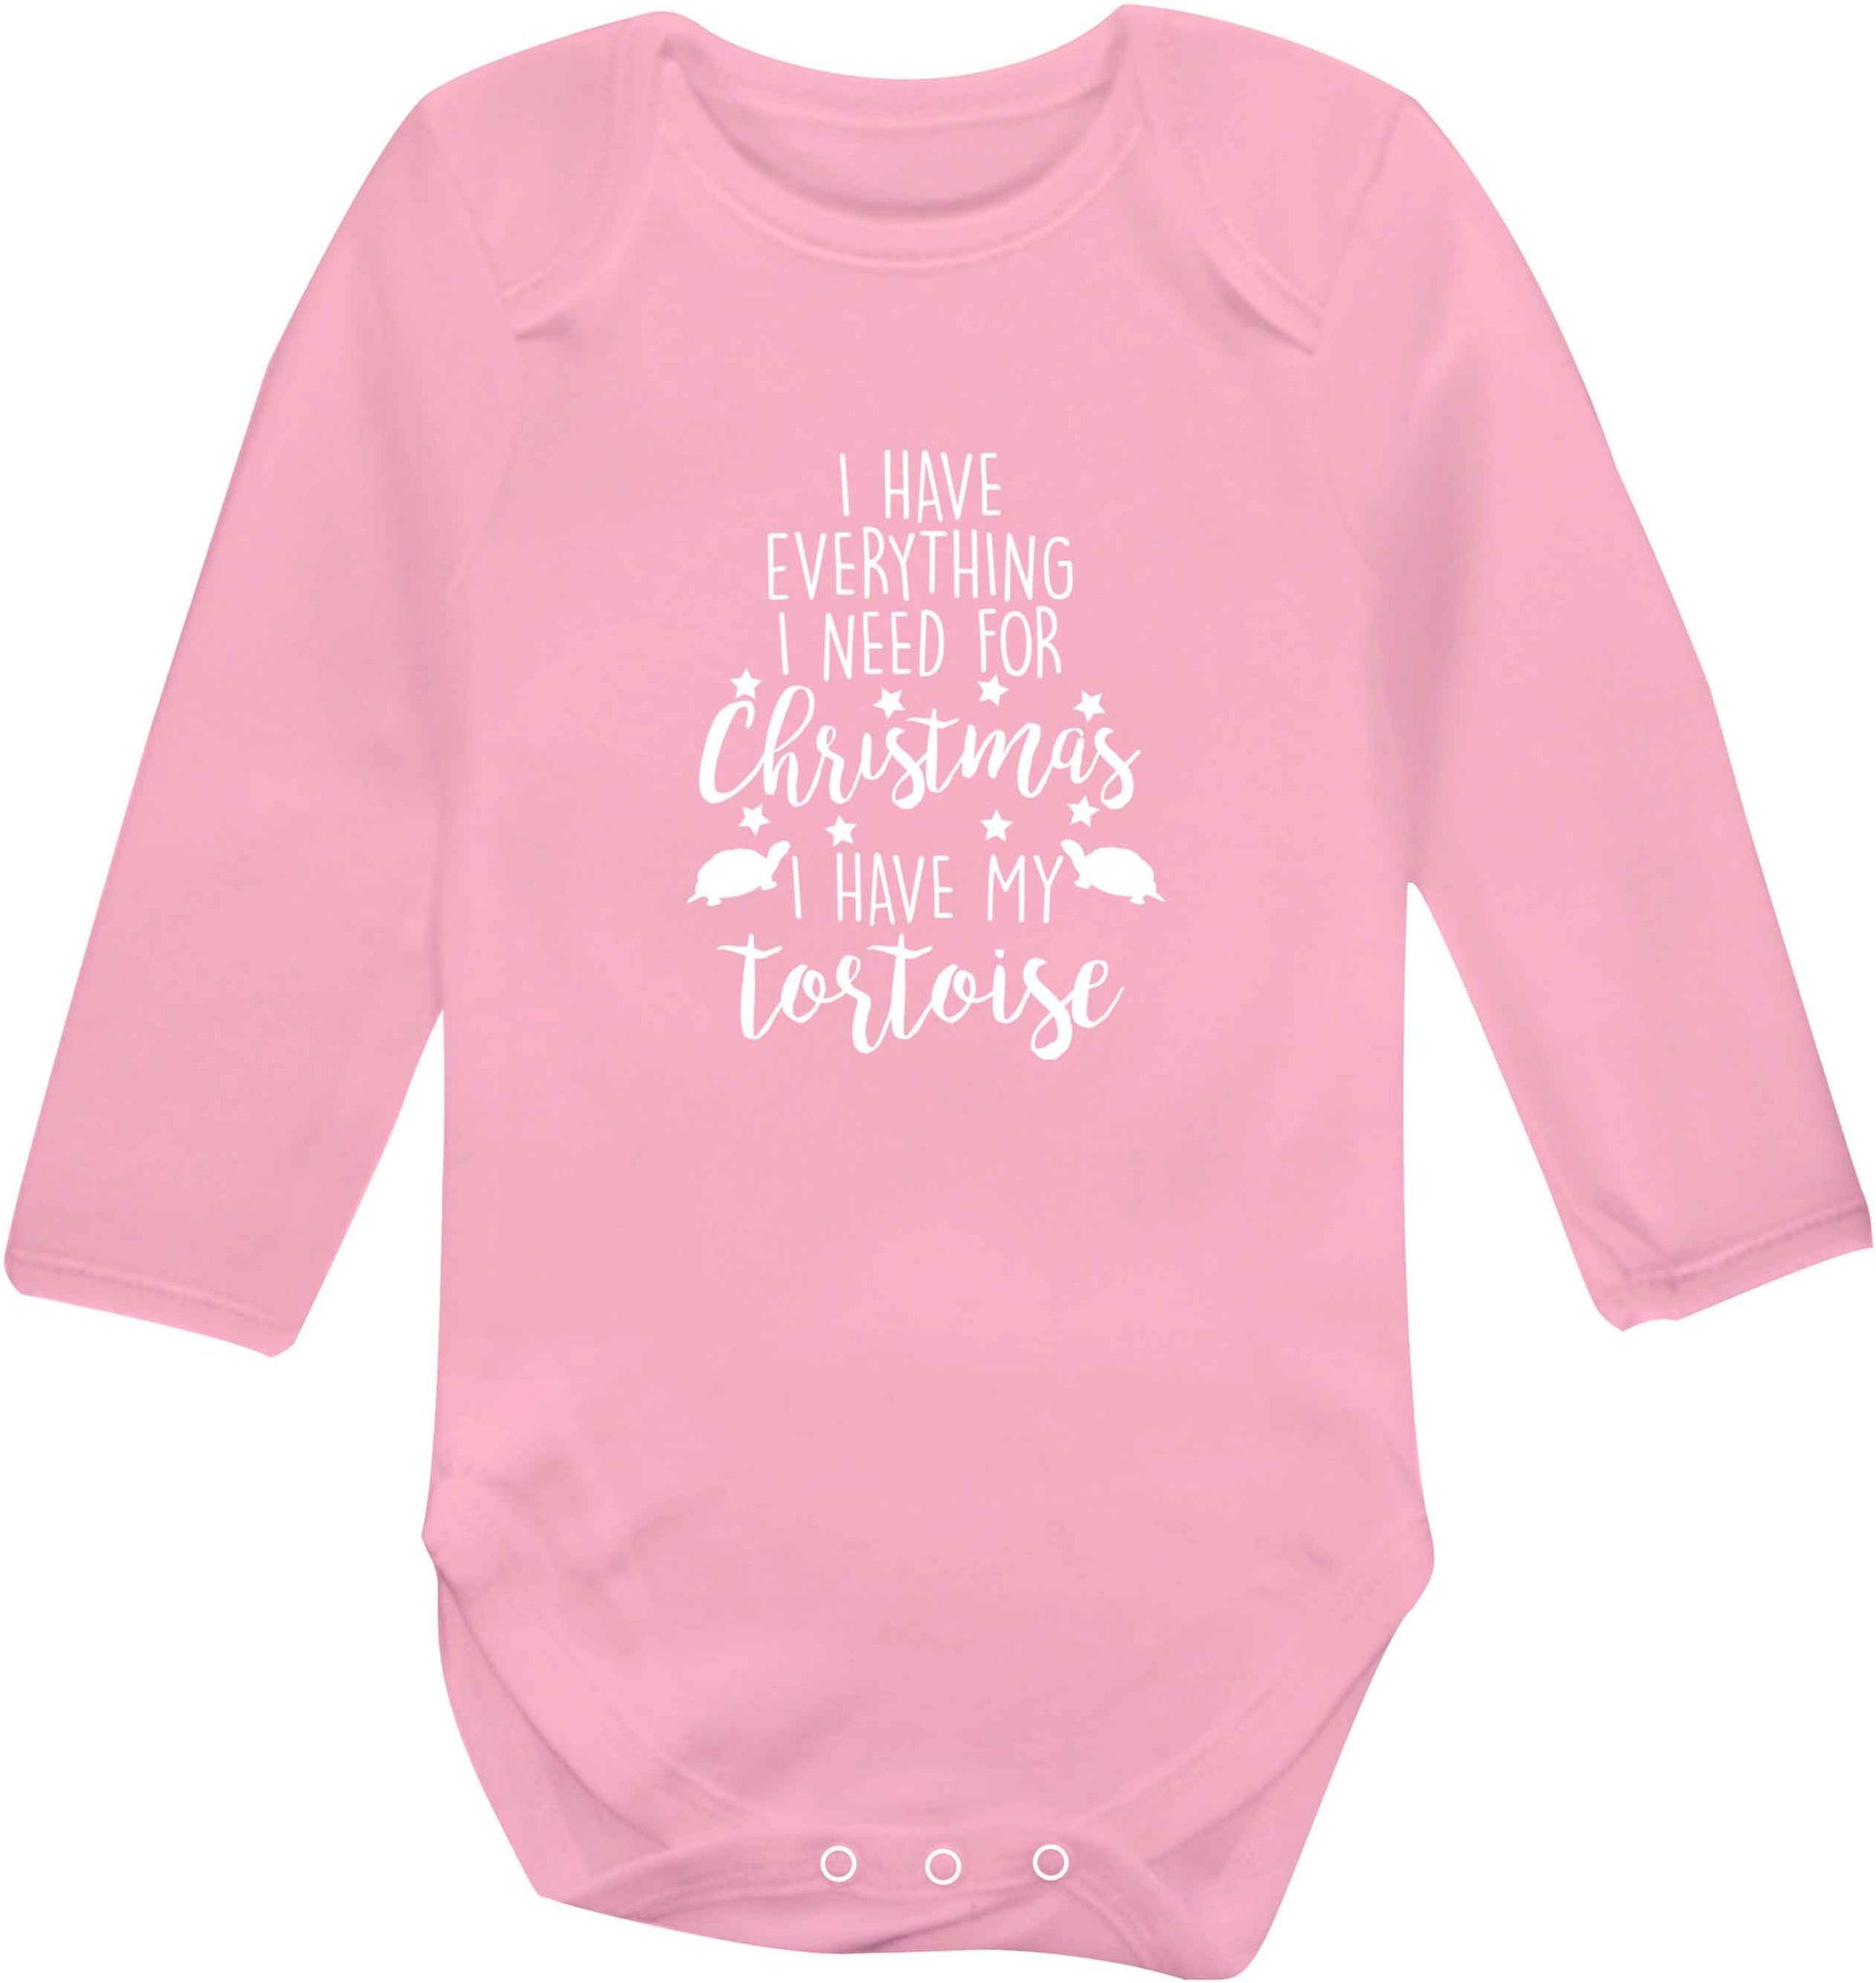 I have everything I need for Christmas I have my tortoise baby vest long sleeved pale pink 6-12 months